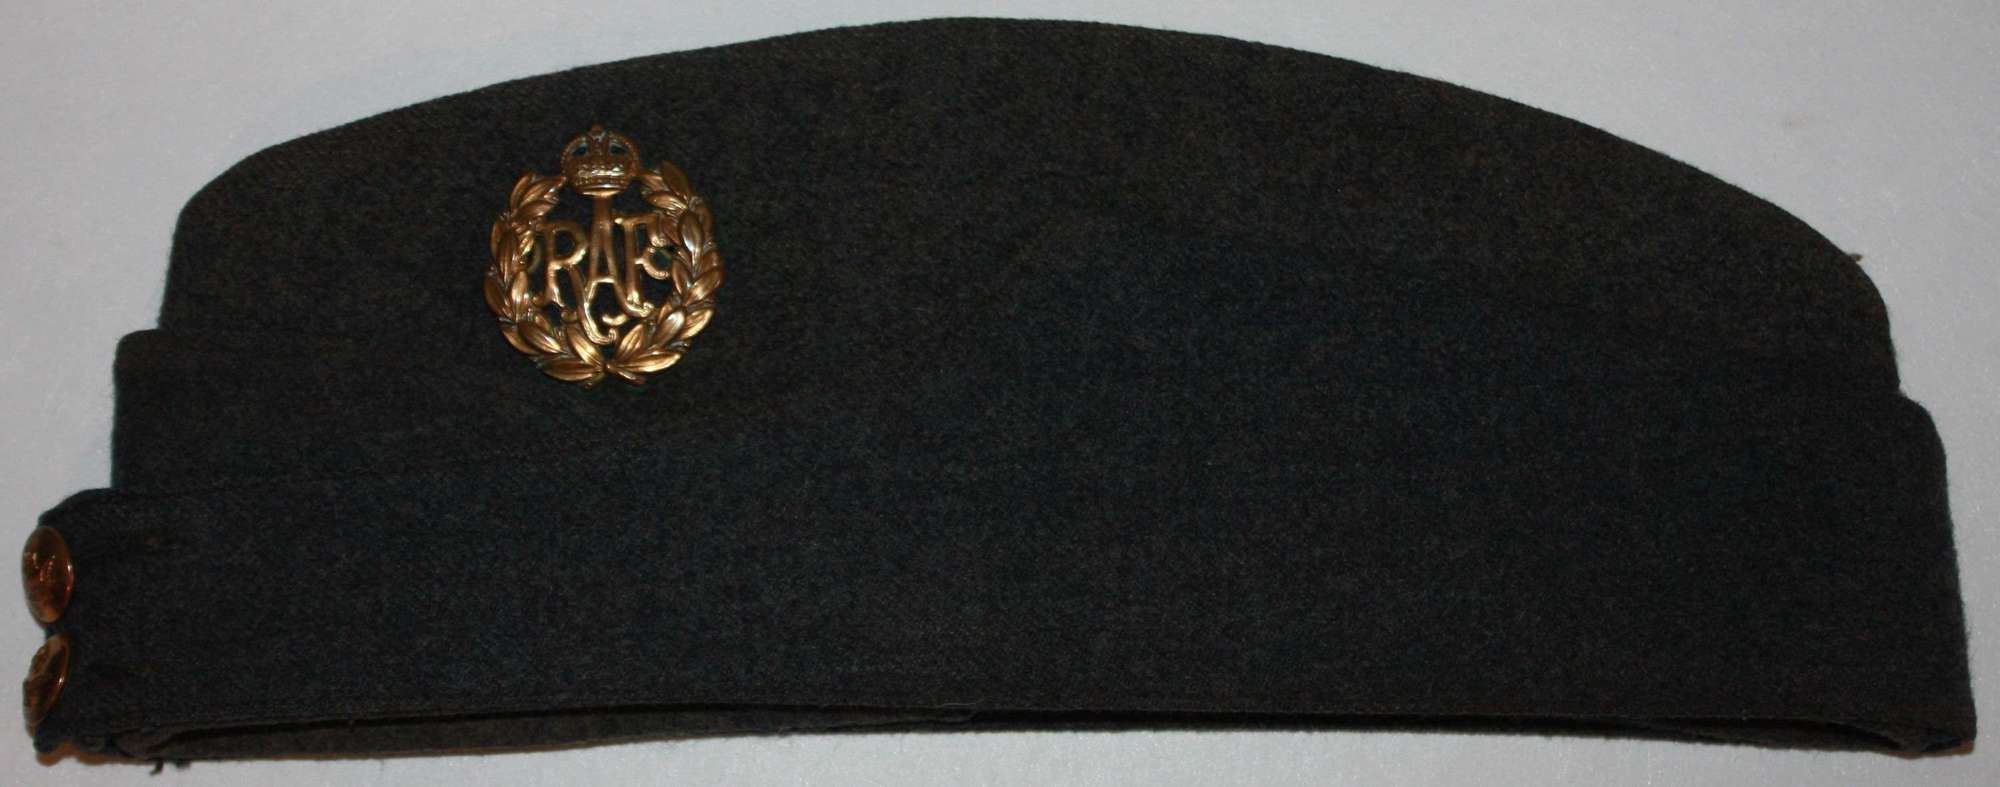 A VERY GOOD 1942 SATE LARGE SIZE RAF SIDE CAP